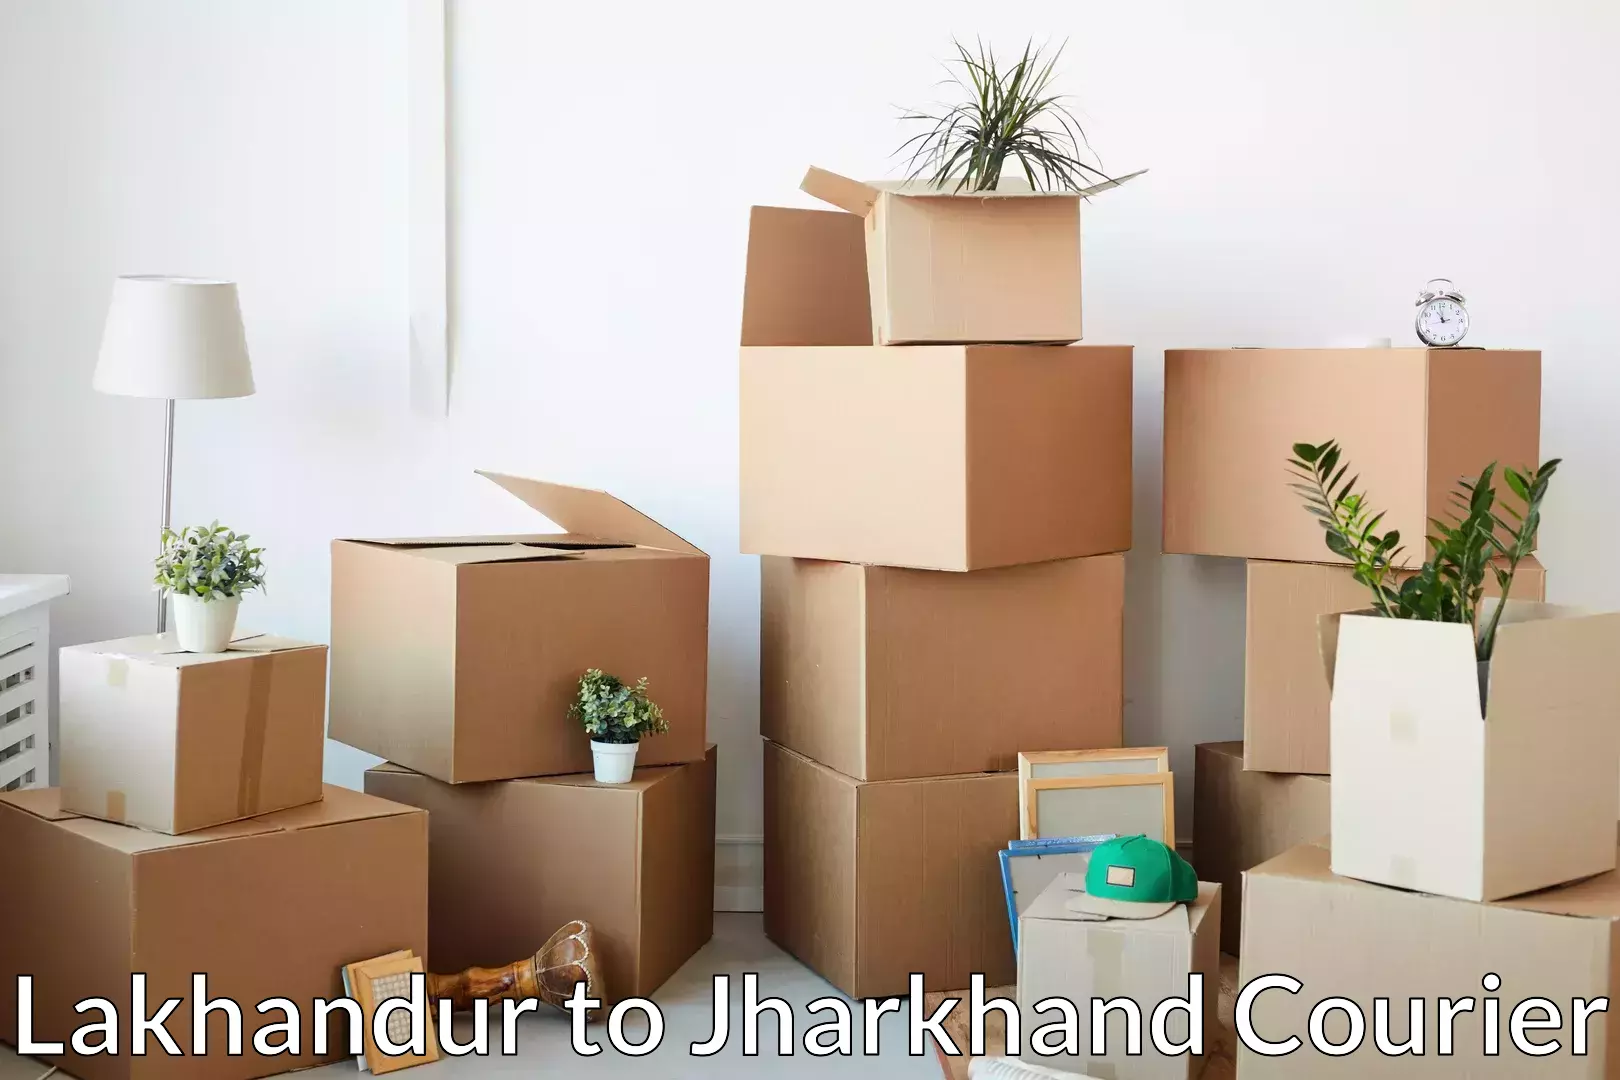 Moving and packing experts Lakhandur to Jharkhand